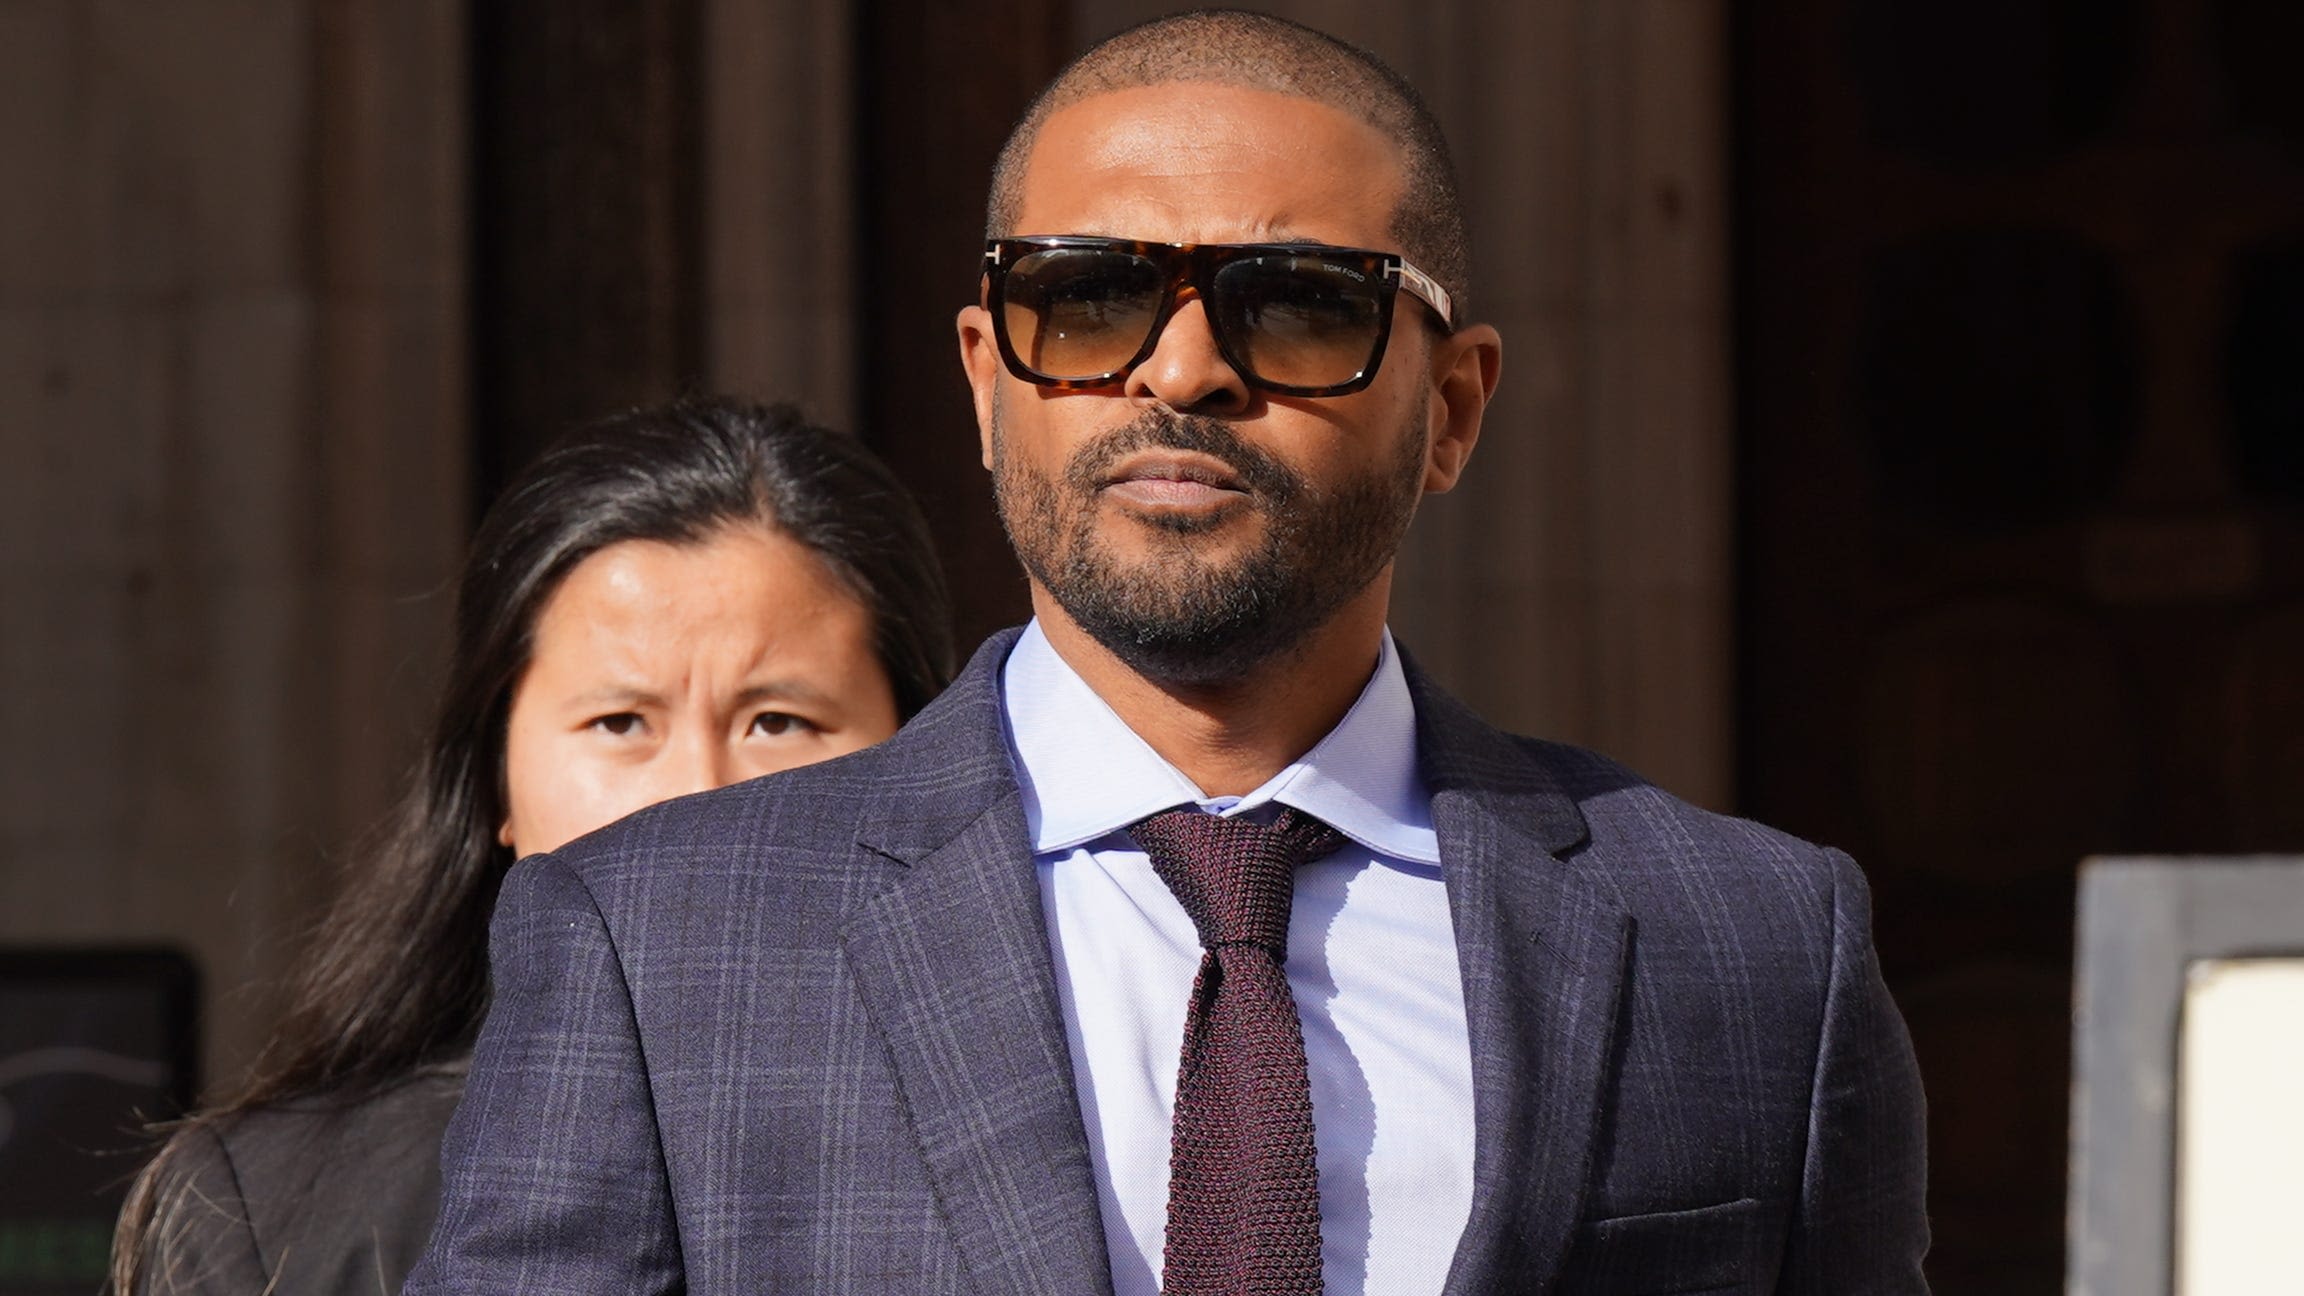 Noel Clarke’s libel claim set for trial next year, High Court told